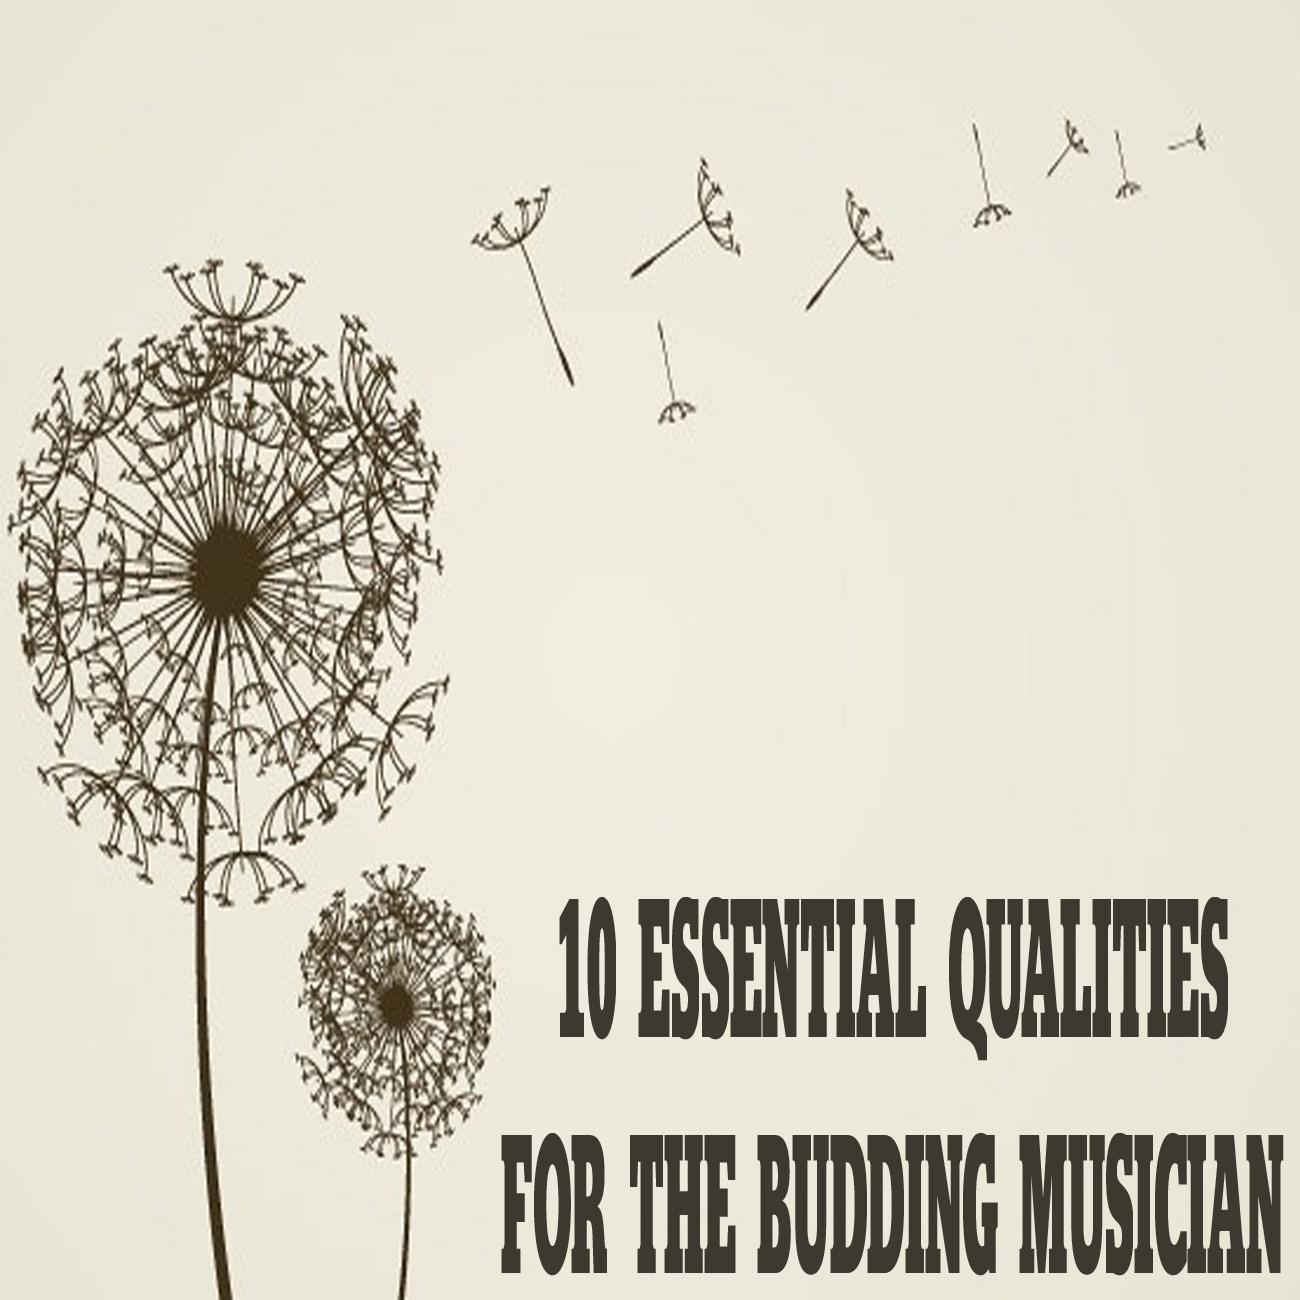 10 essential qualities for the budding musician